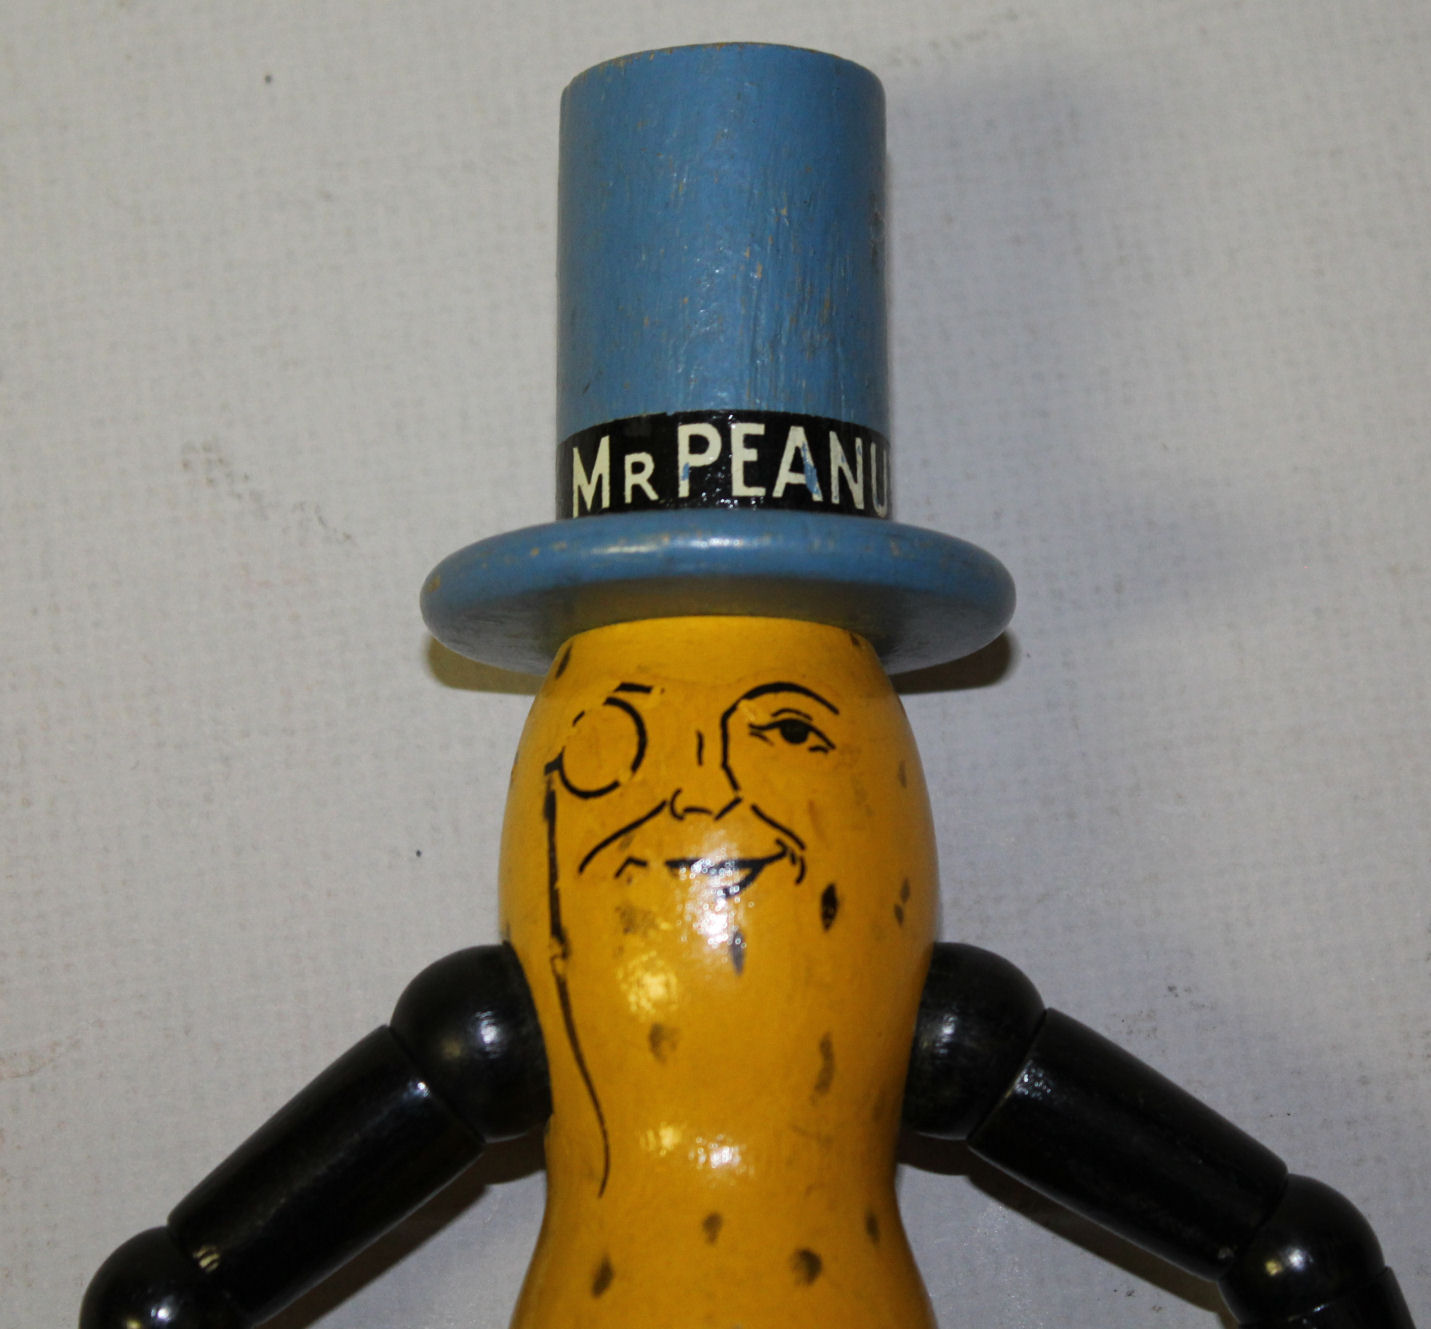 Bargain John's Antiques | Mr Peanut Planters Advertising Wood Segmented Toy by ...1431 x 1329